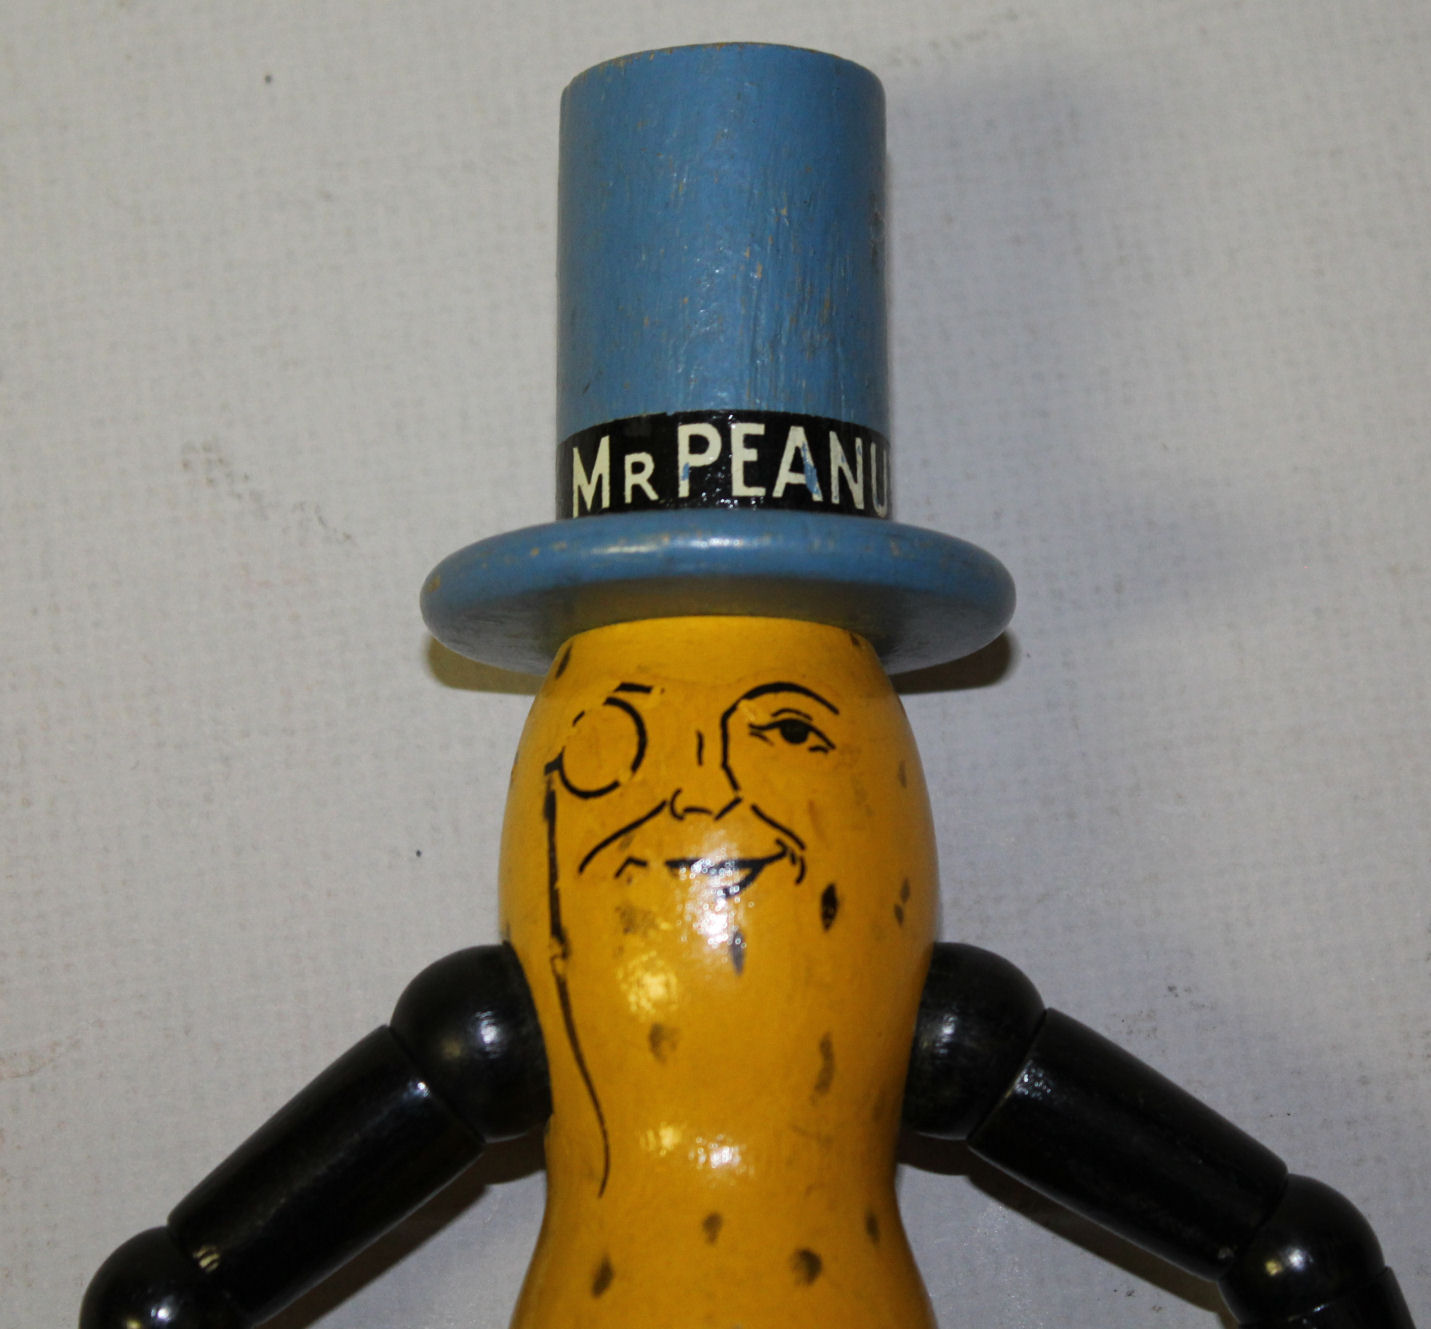 Bargain John's Antiques | Mr Peanut Planters Advertising Wood Segmented Toy by ...1431 x 1329